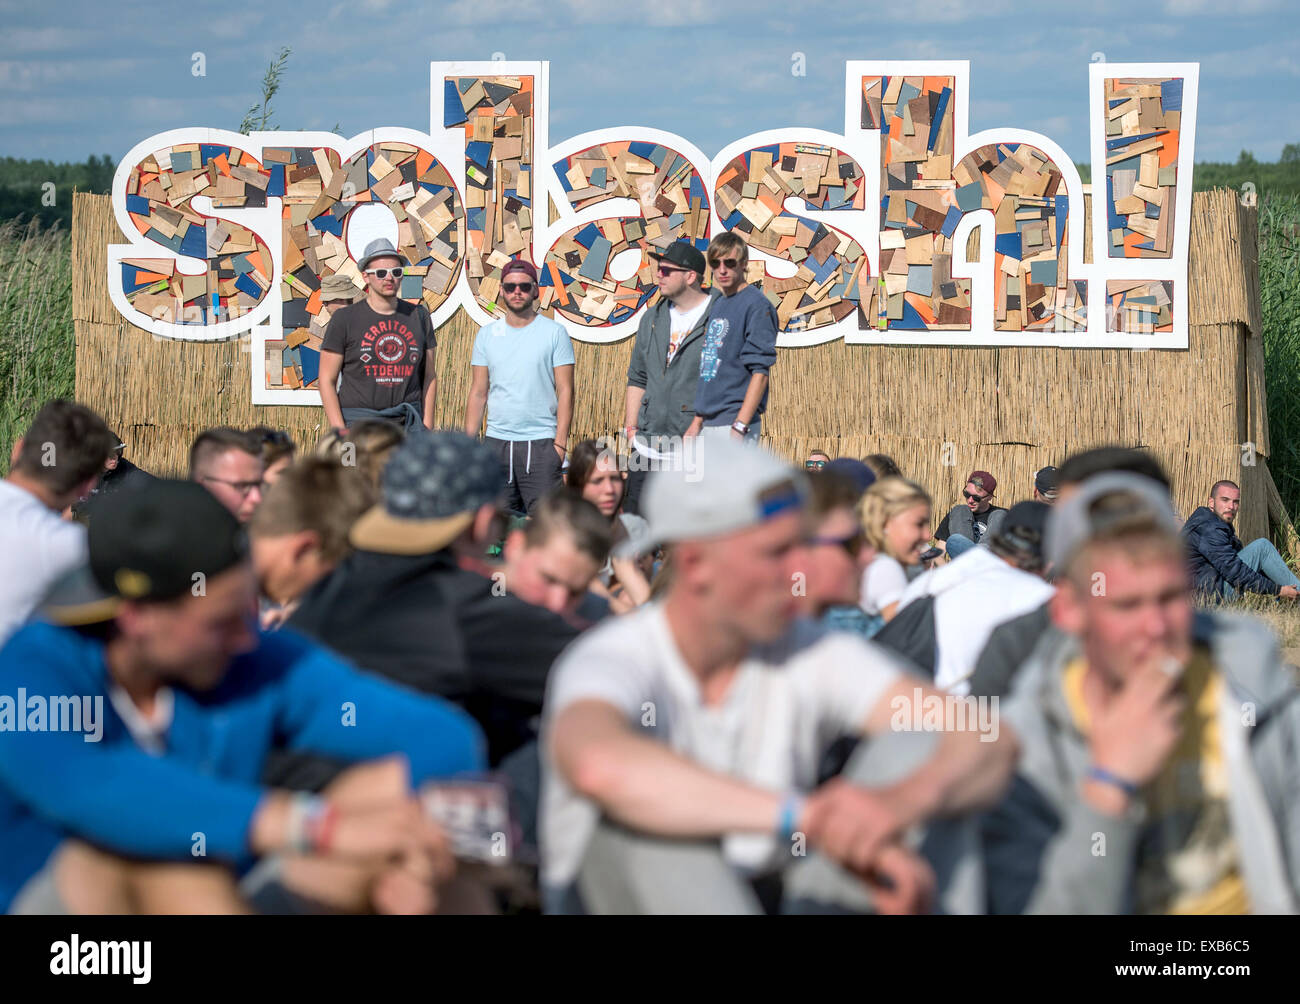 Ferropolis, Germany. 10th July, 2015. Festival-goers at the Splash Festival in Ferropolis, Germany, 10 July 2015. The Splash Festival is sold out with 20'000 visitors and runs from 10-12 July 2015. PHOTO: OLE SPATA/DPA/Alamy Live News Stock Photo